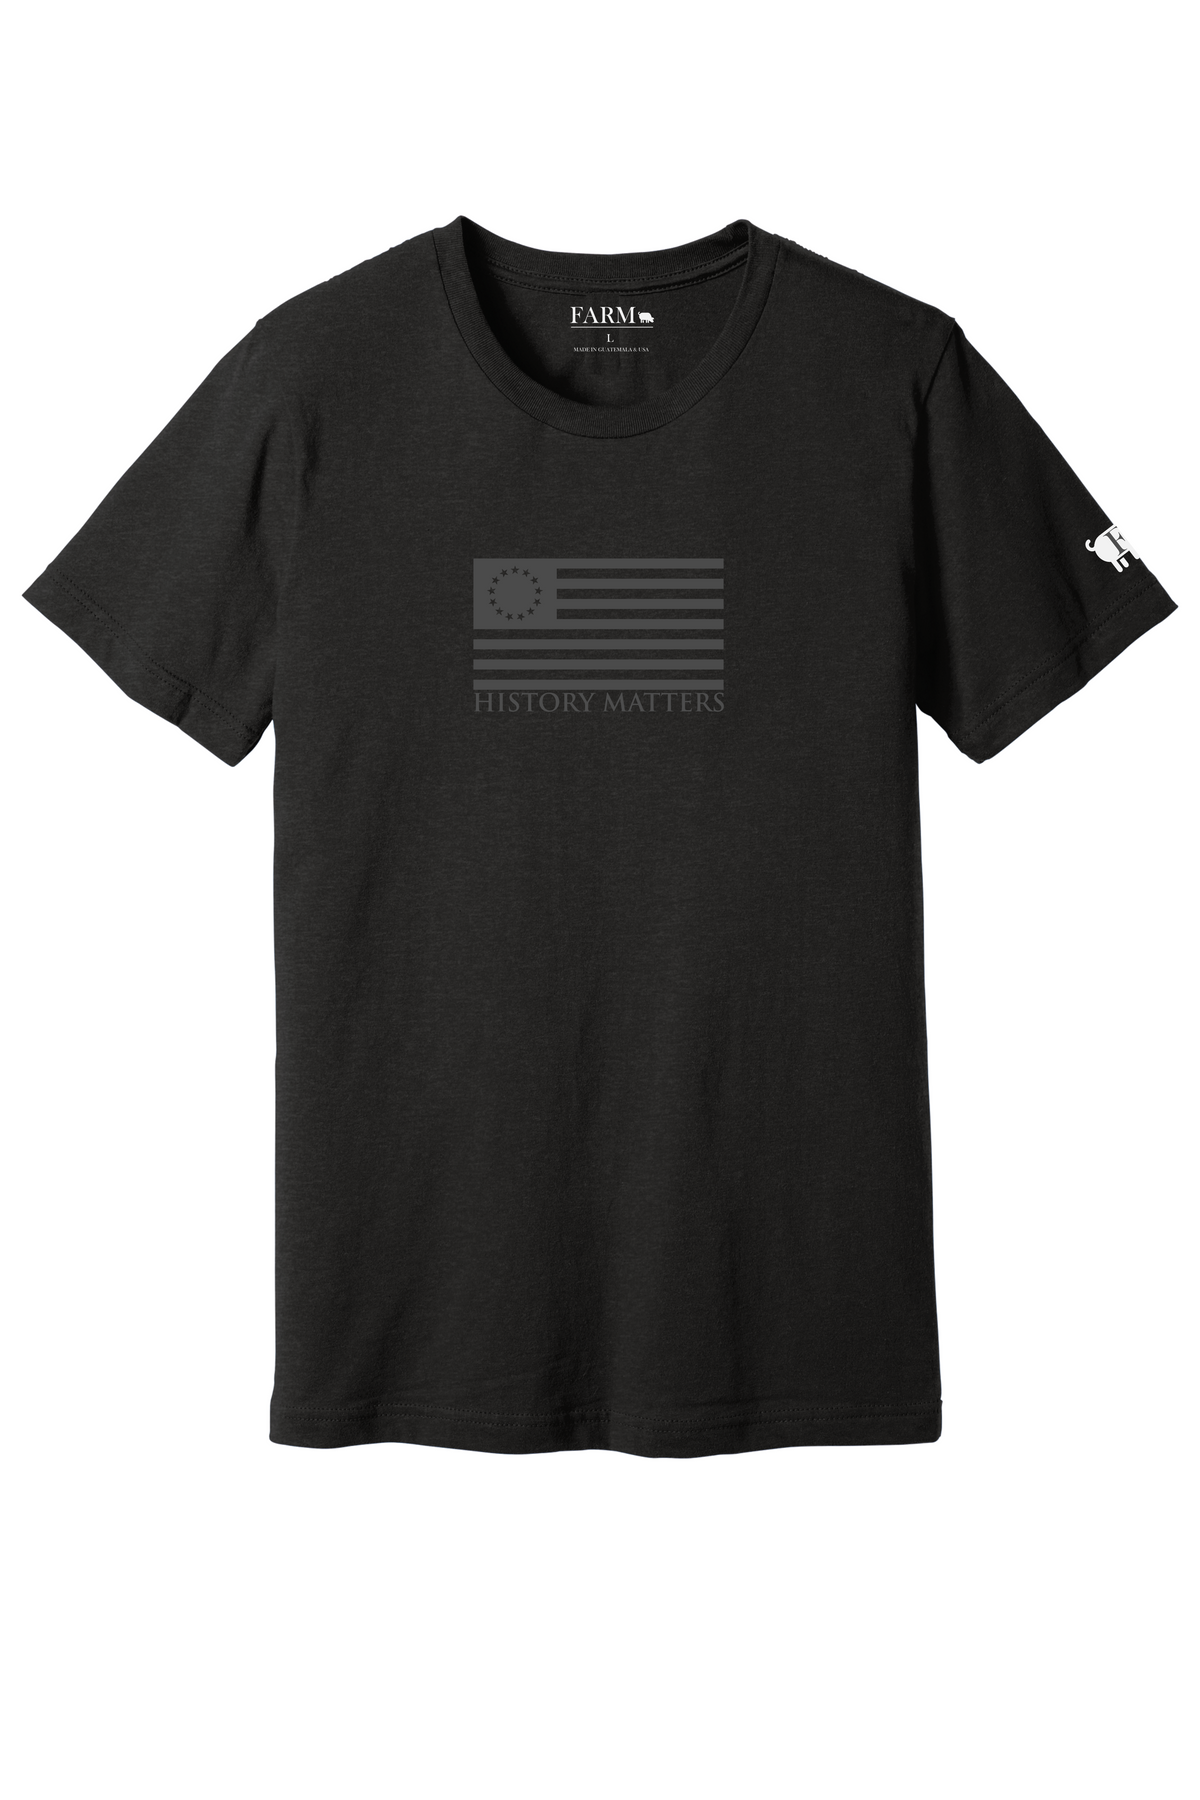 Betsy Ross History Matters American Flag T-Shirt Adult